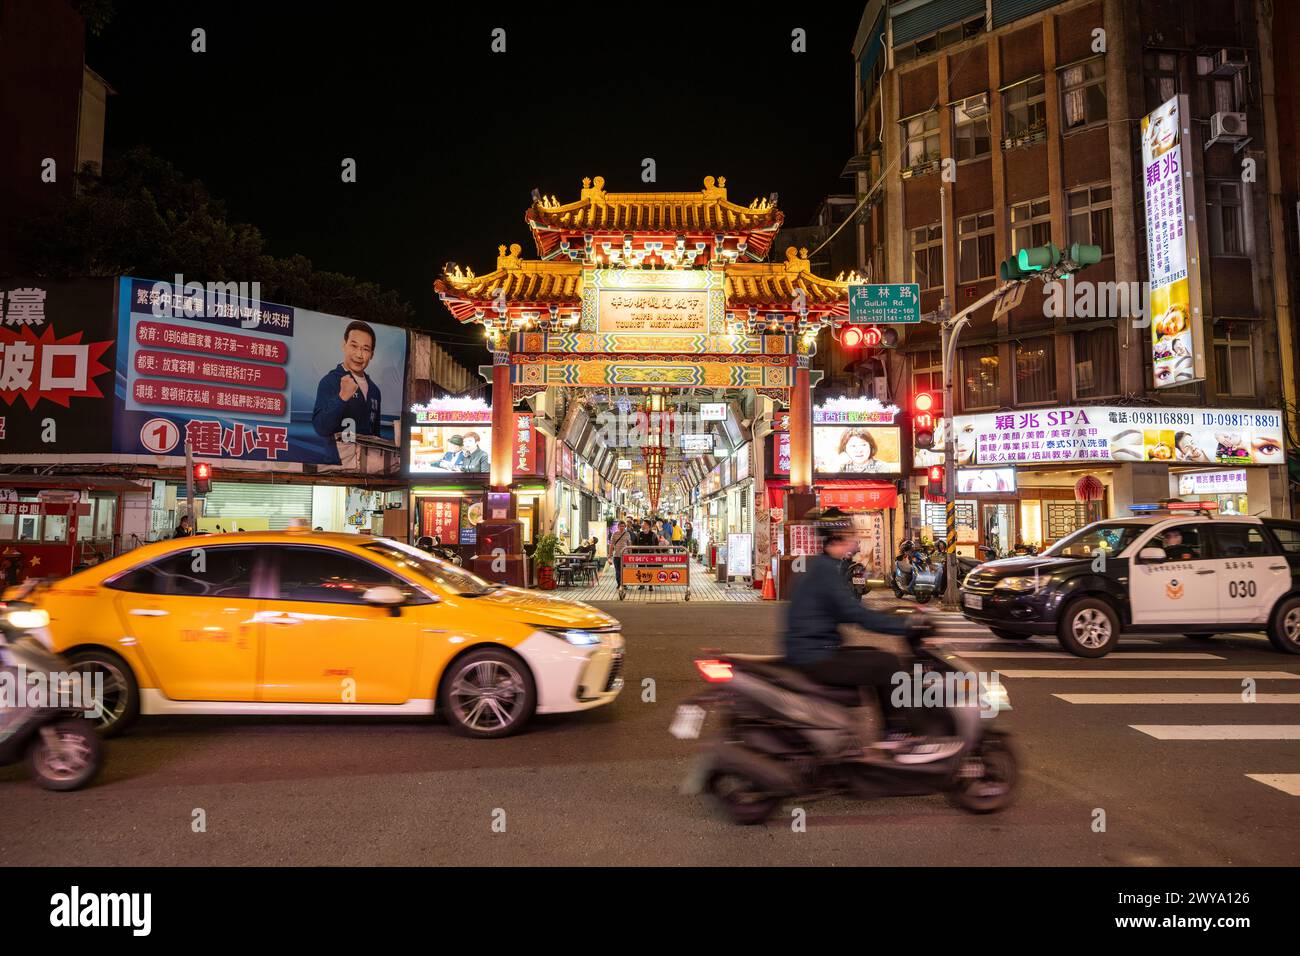 A city scene at night with bright lights from cars and store signs, showcasing the liveliness of urban Taipei nightlife Stock Photo